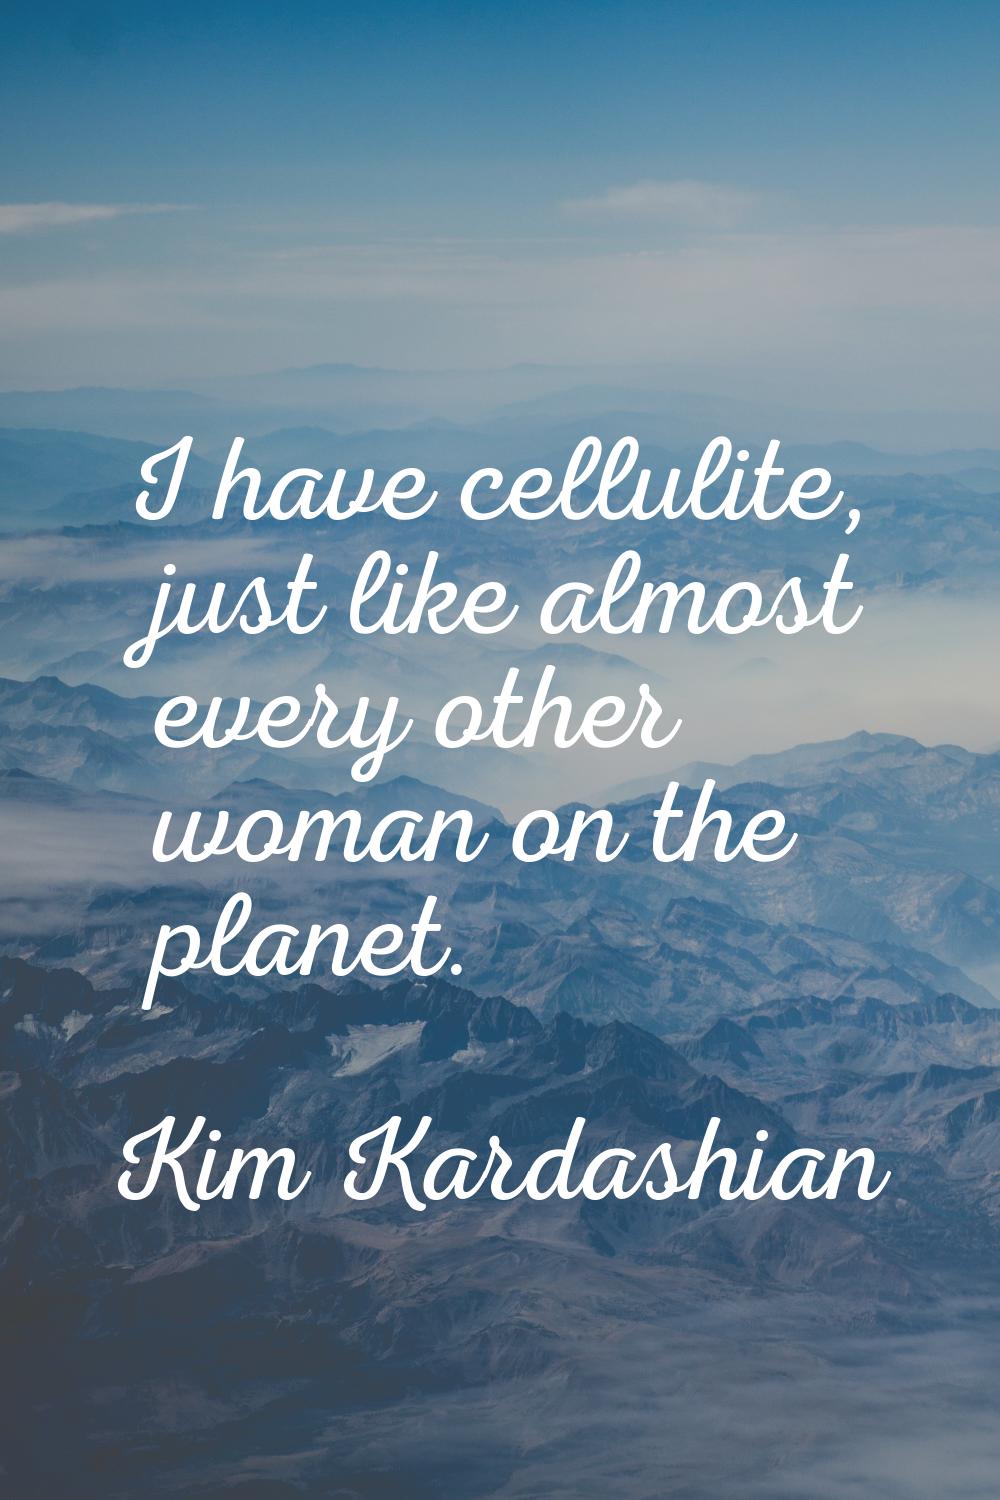 I have cellulite, just like almost every other woman on the planet.